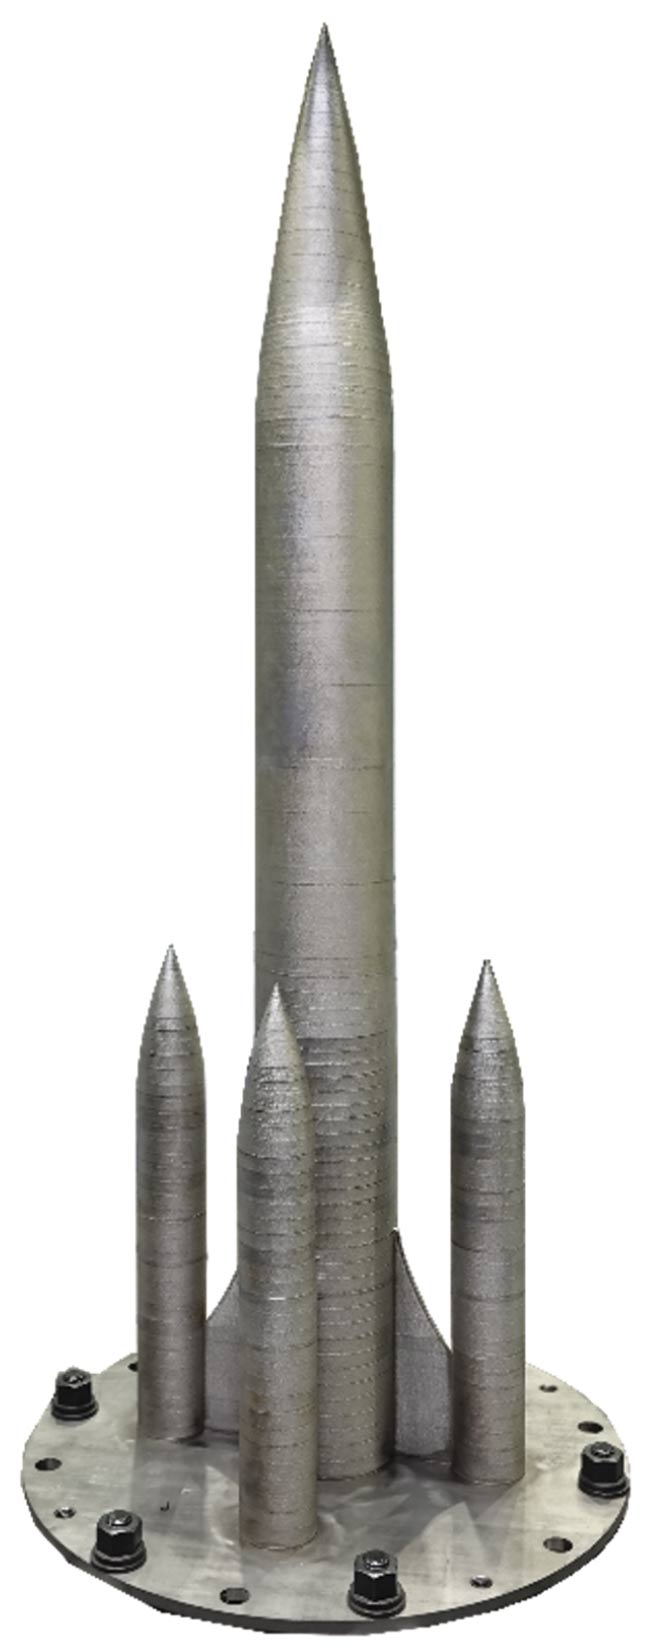 A titanium rocket sample made with Nidec Machine Tool’s largest laser-based DED metal printer weighs 30 kg and took 30 h to print. Courtesy of Nidec Machine Tool.